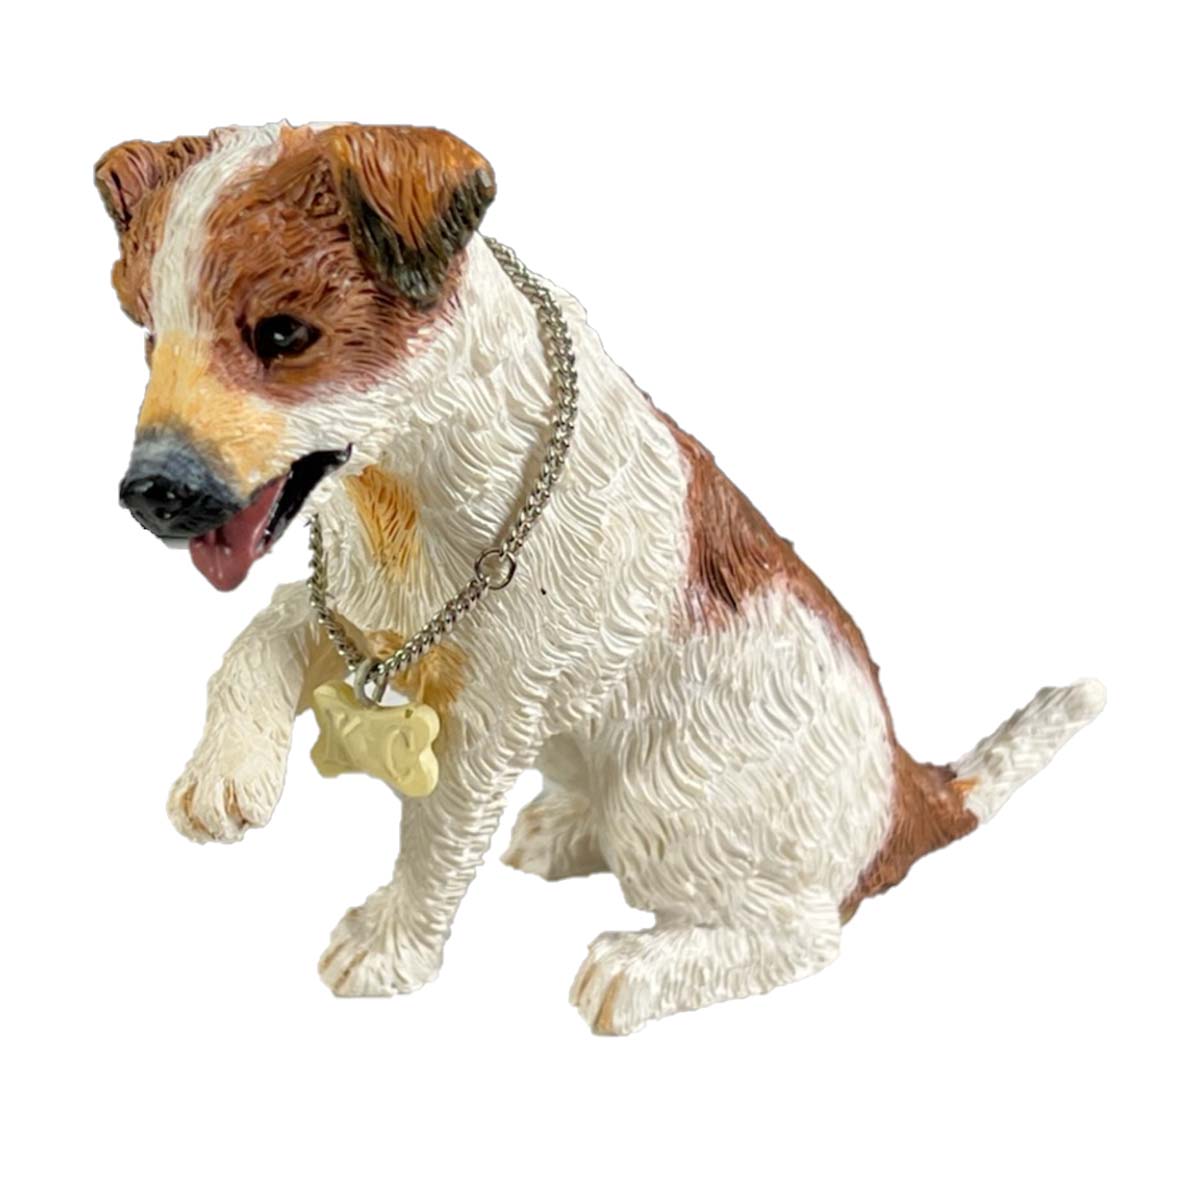 Parson Jack Russel-Kennel Club Dogs*